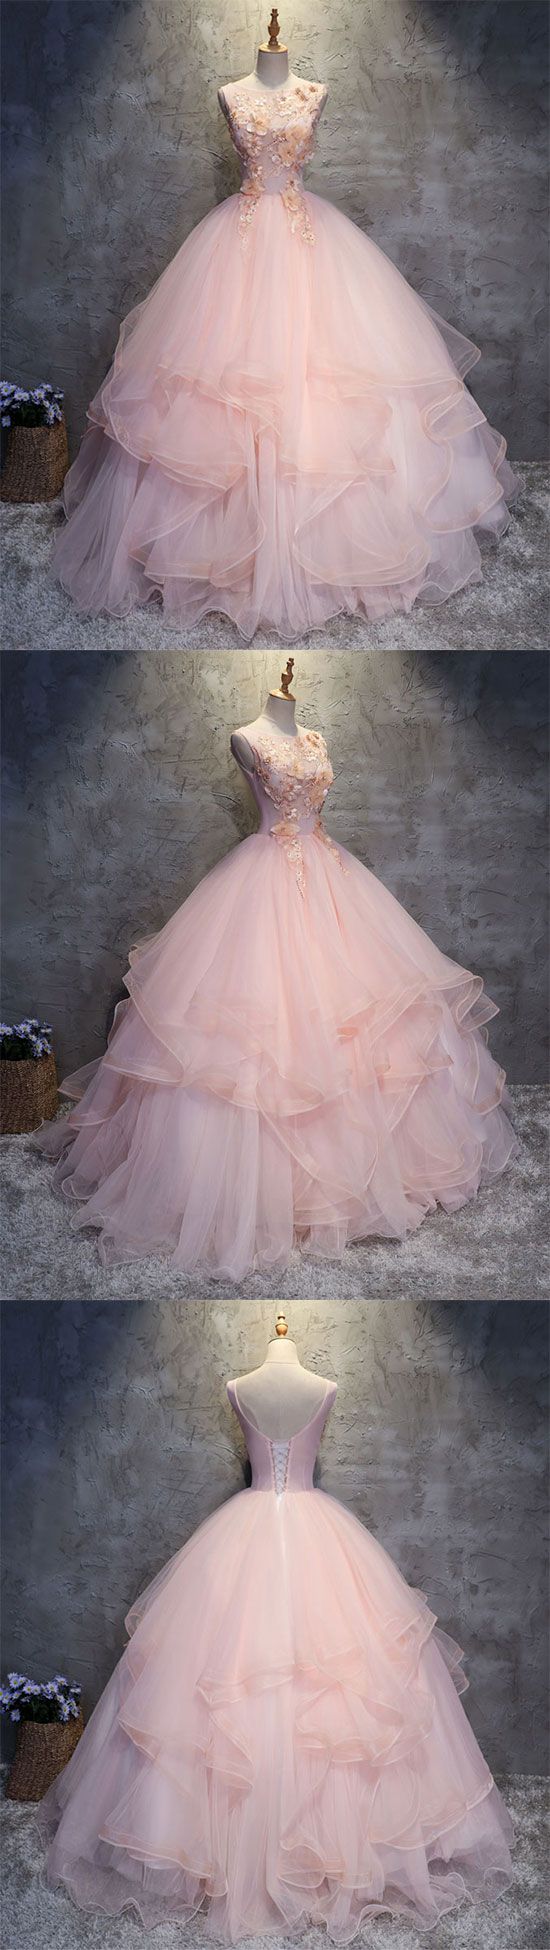 Pink Round Neck Tulle Lace Applique Long Prom Dress, Pink Evening Dress M7844